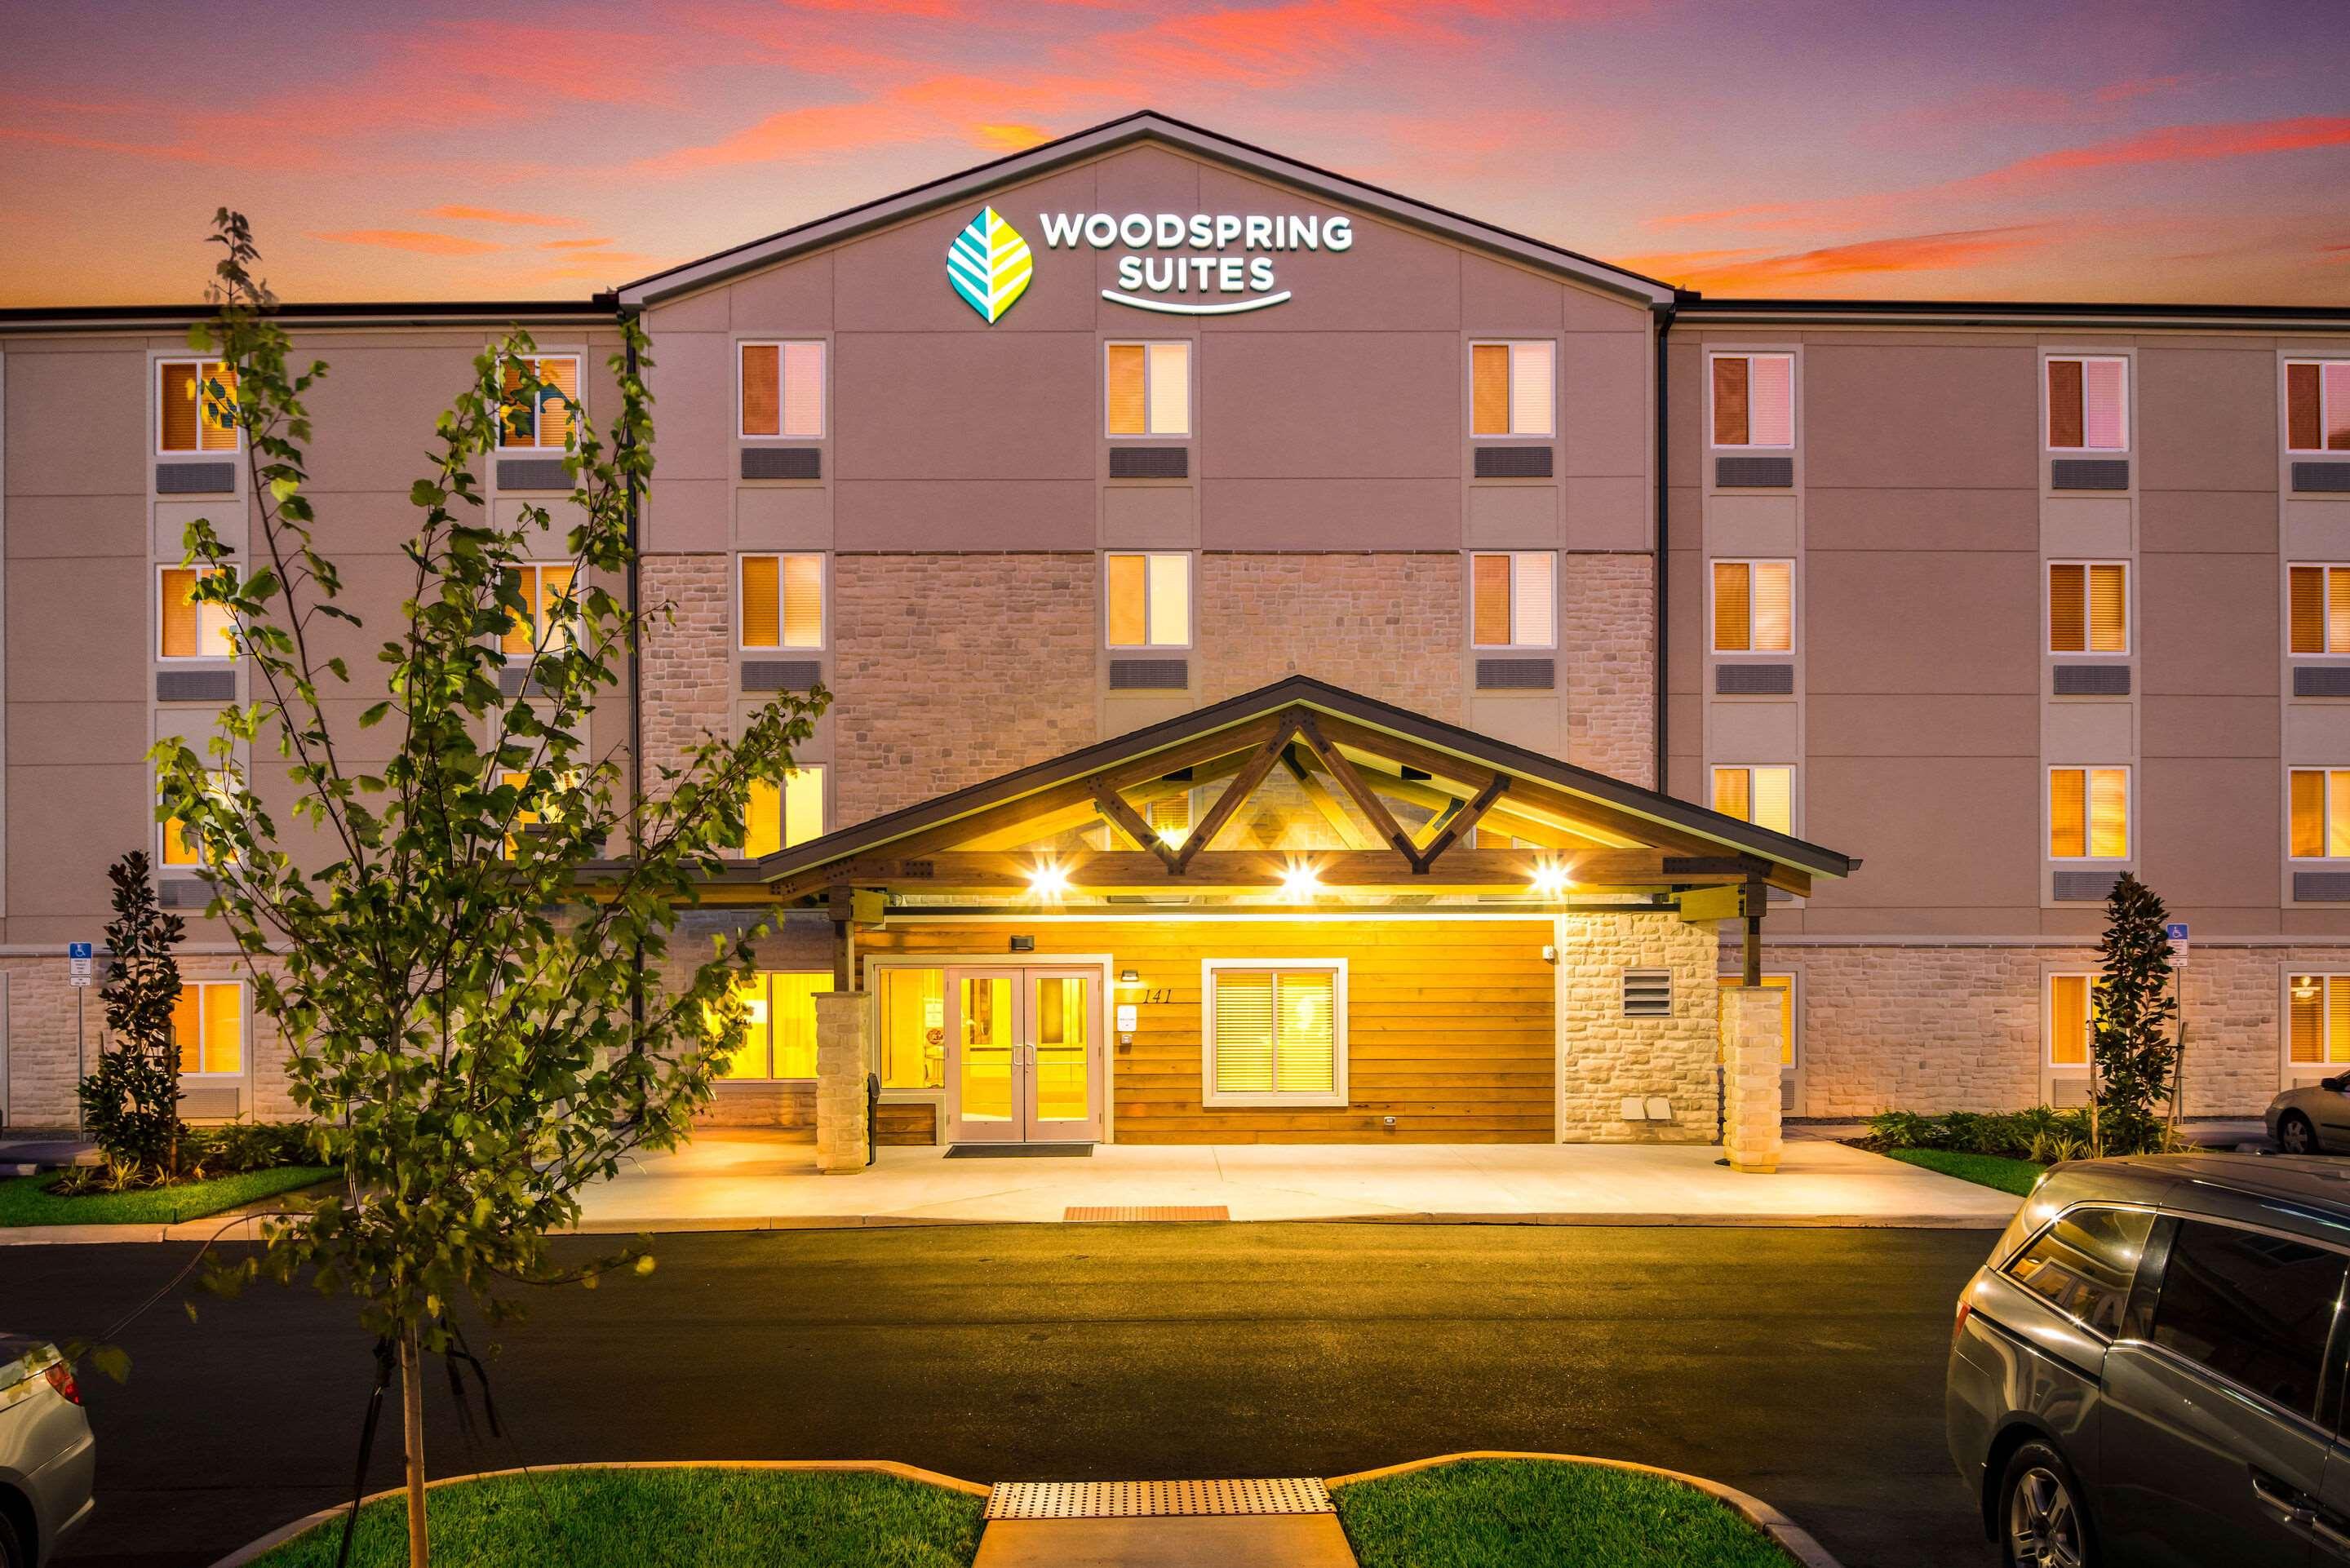 WOODSPRING SUITES - Prices & Specialty Hotel Reviews (Lynchburg, VA)